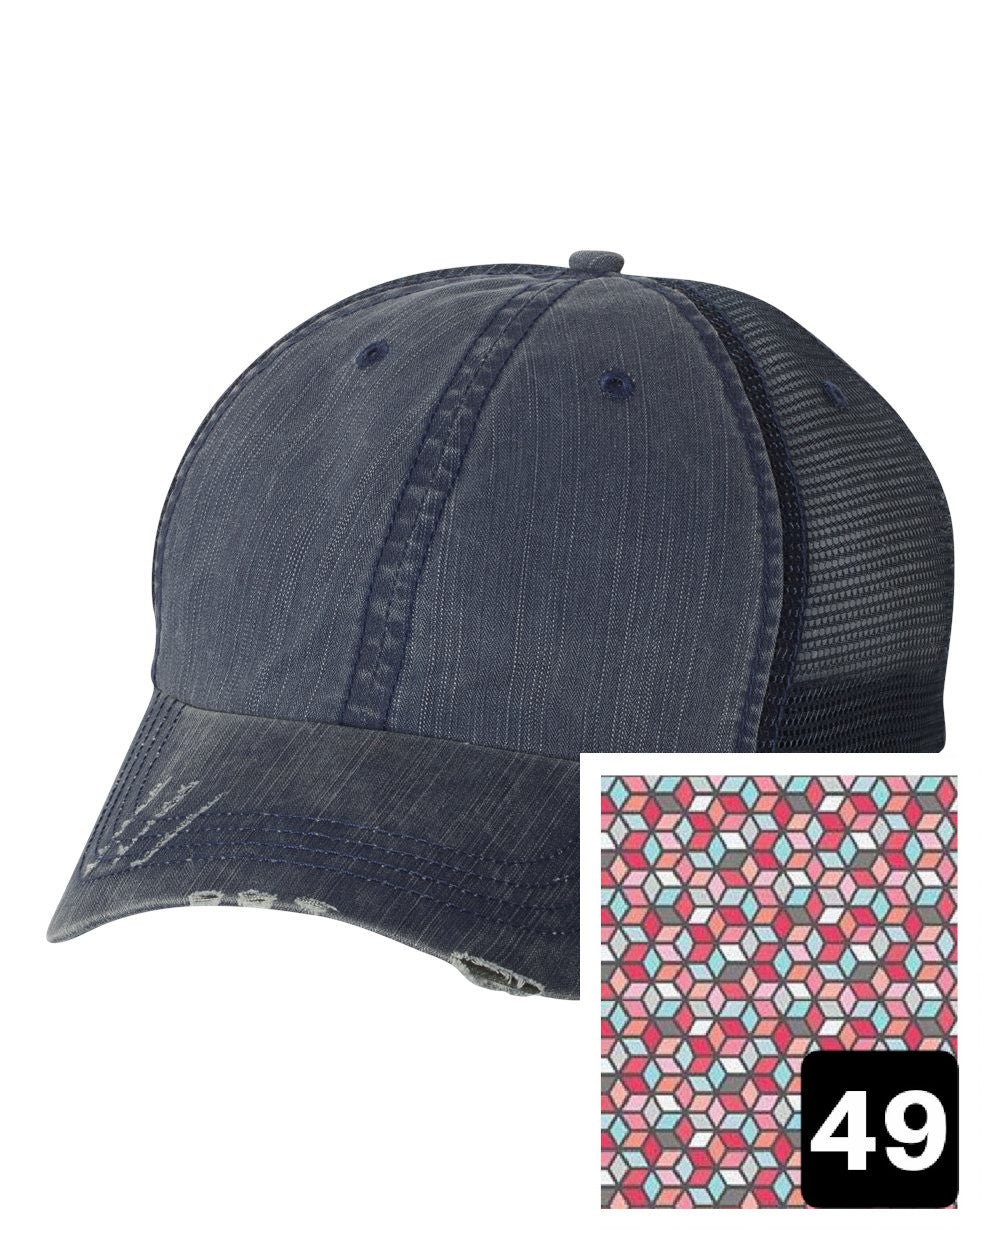 New York Hat | Navy Distressed Trucker Cap | Many Fabric Choices